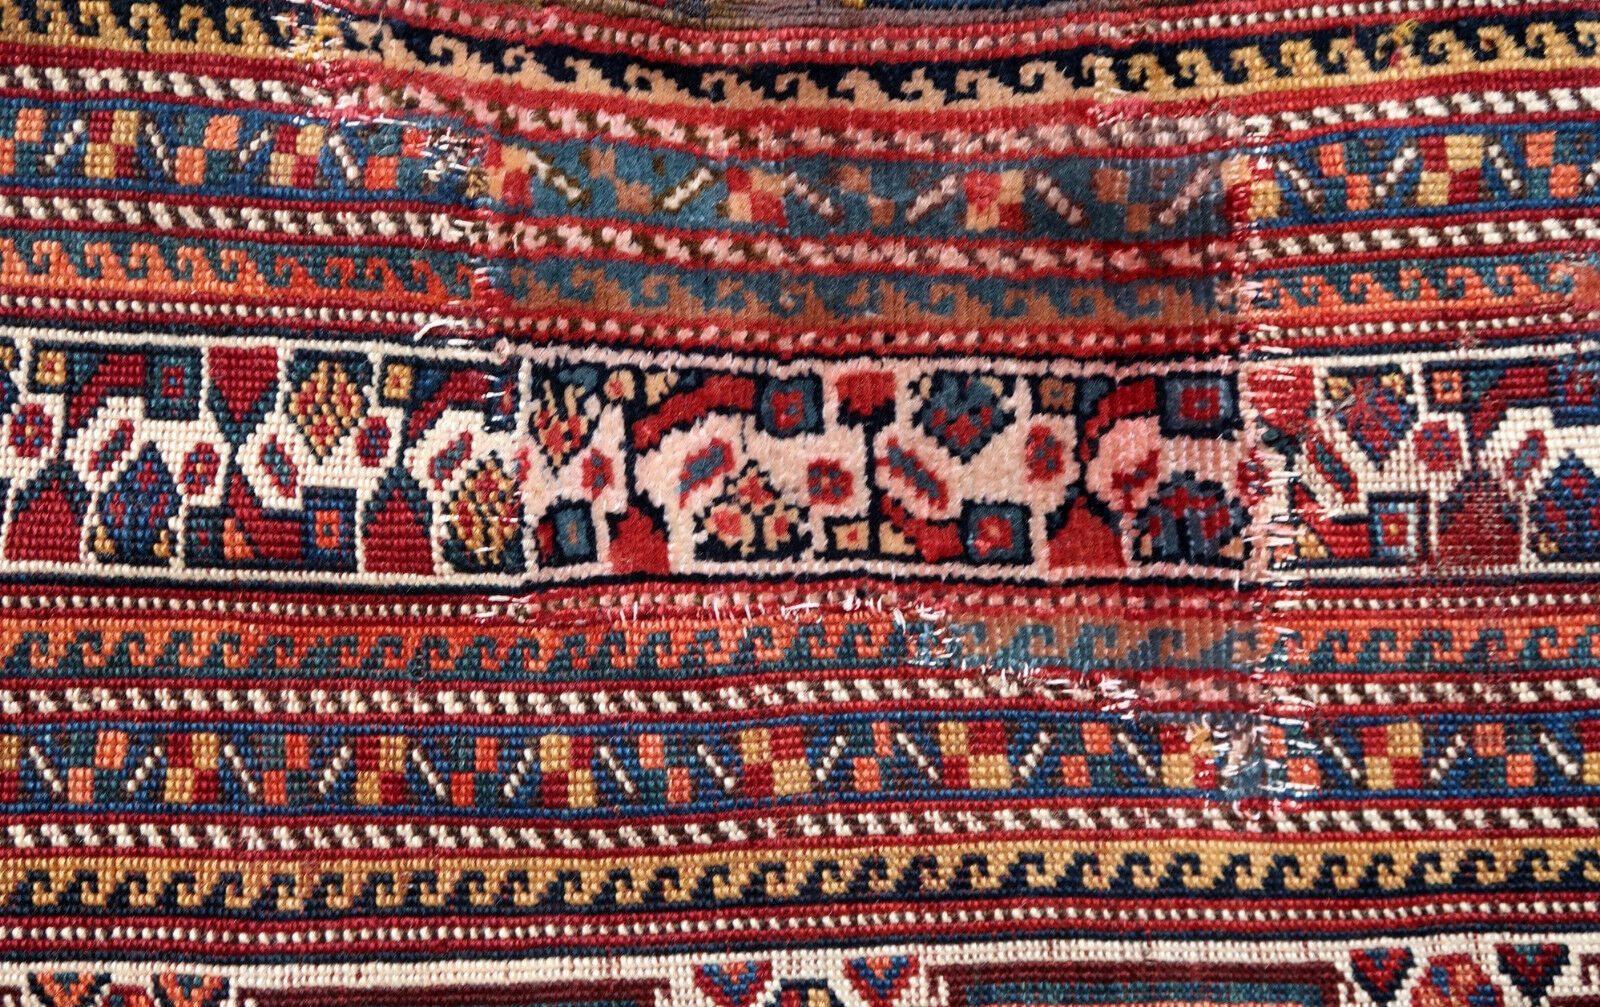 Handmade antique Gashkai rug in original condition, has some age wear. The rug is from the beginning of 20th century.